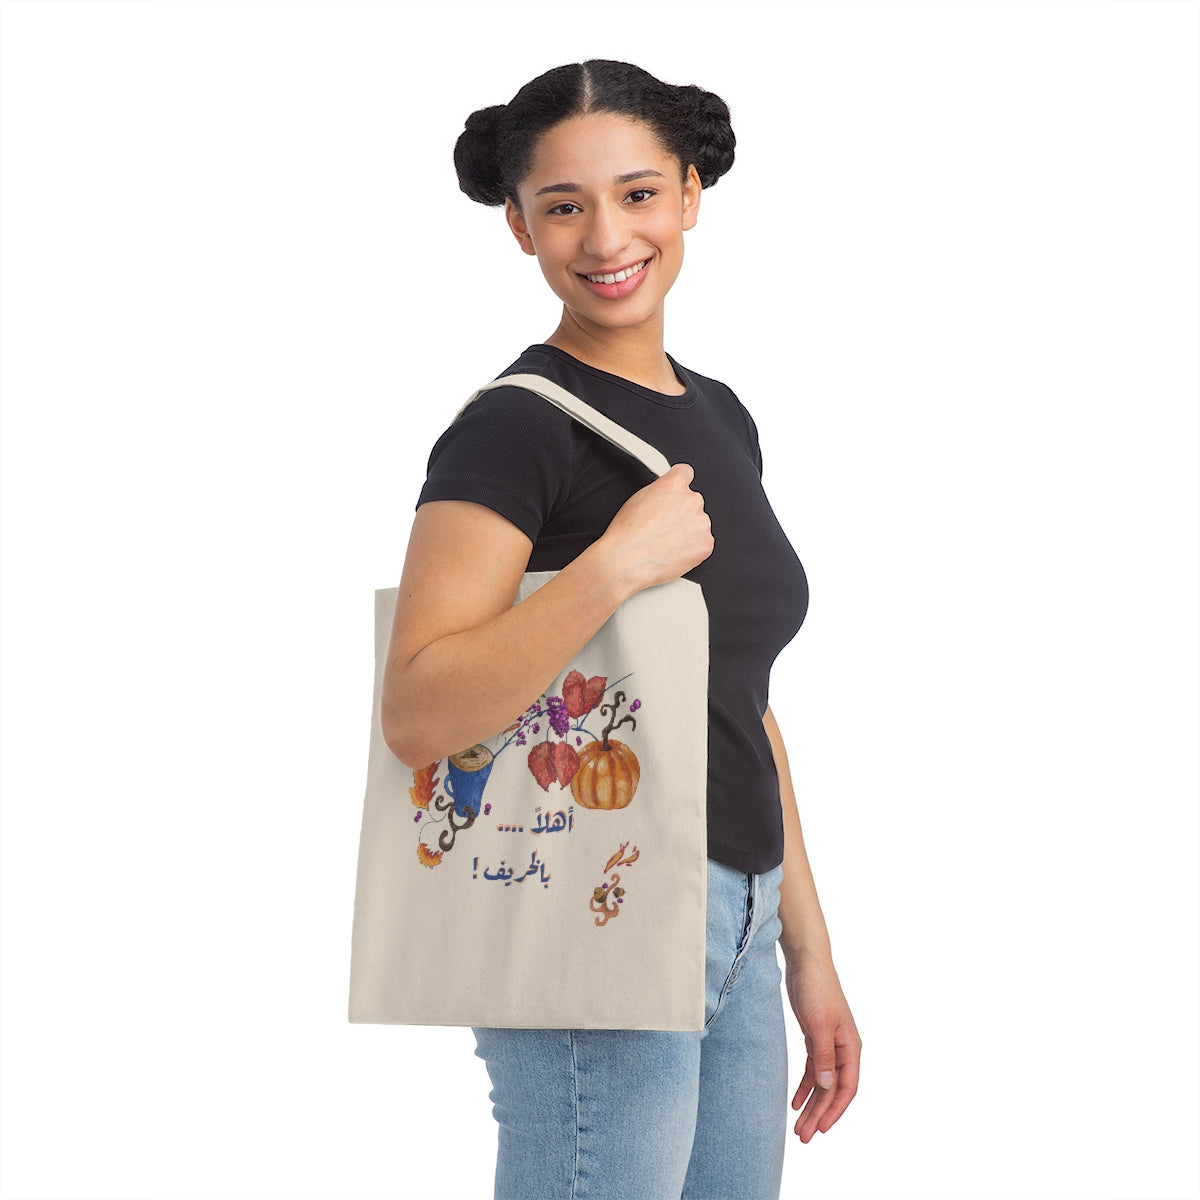 Welcome Autumn/اهلا بالخريف - natural canvas Tote bag- Arabic